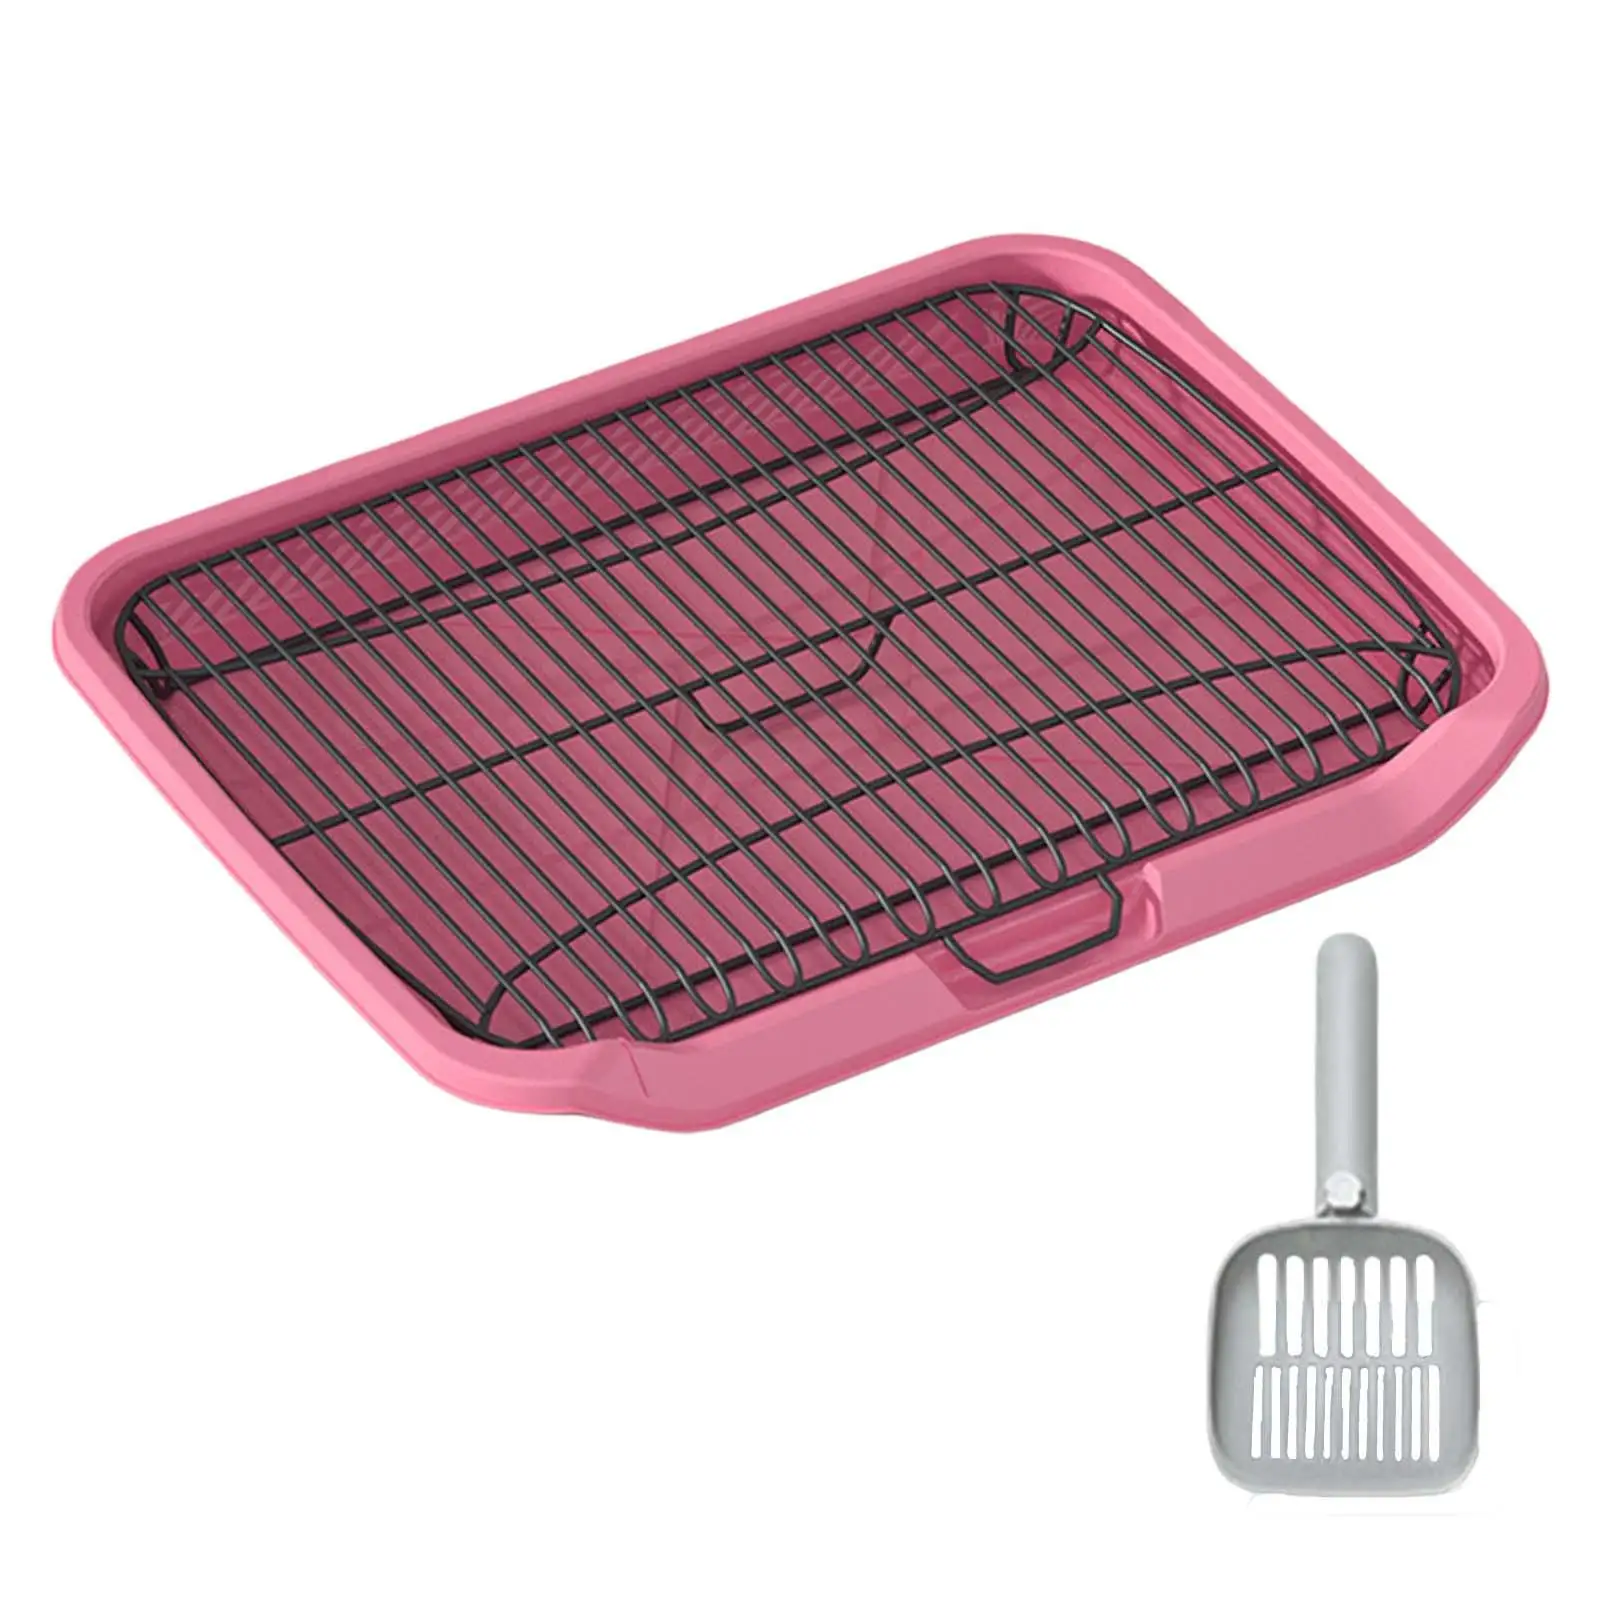 Dog Toilet Puppy Training Potty Tray Litter Box for Small and Medium Dog Cleaning Tool Trainer Corner Puppy Pee Pad Holder